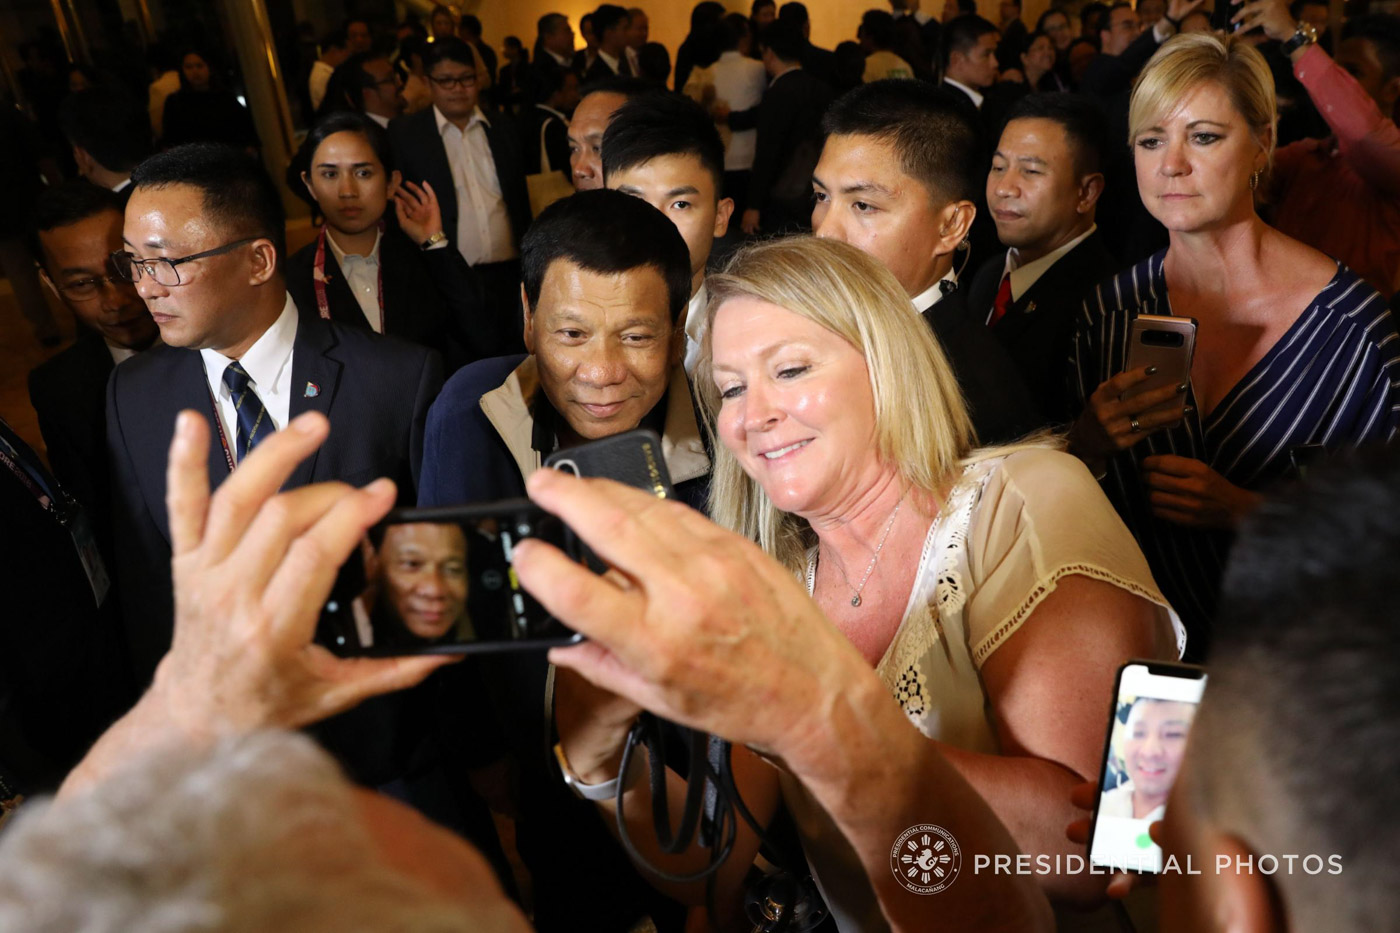 USUAL WELCOME. President Rodrigo Duterte poses for a selfie as he gets a warm welcome upon his arrival at the Ritz Hotel in Singapore on April 26, 2018 for the 32nd Asean Summit. Malacañang Photo  